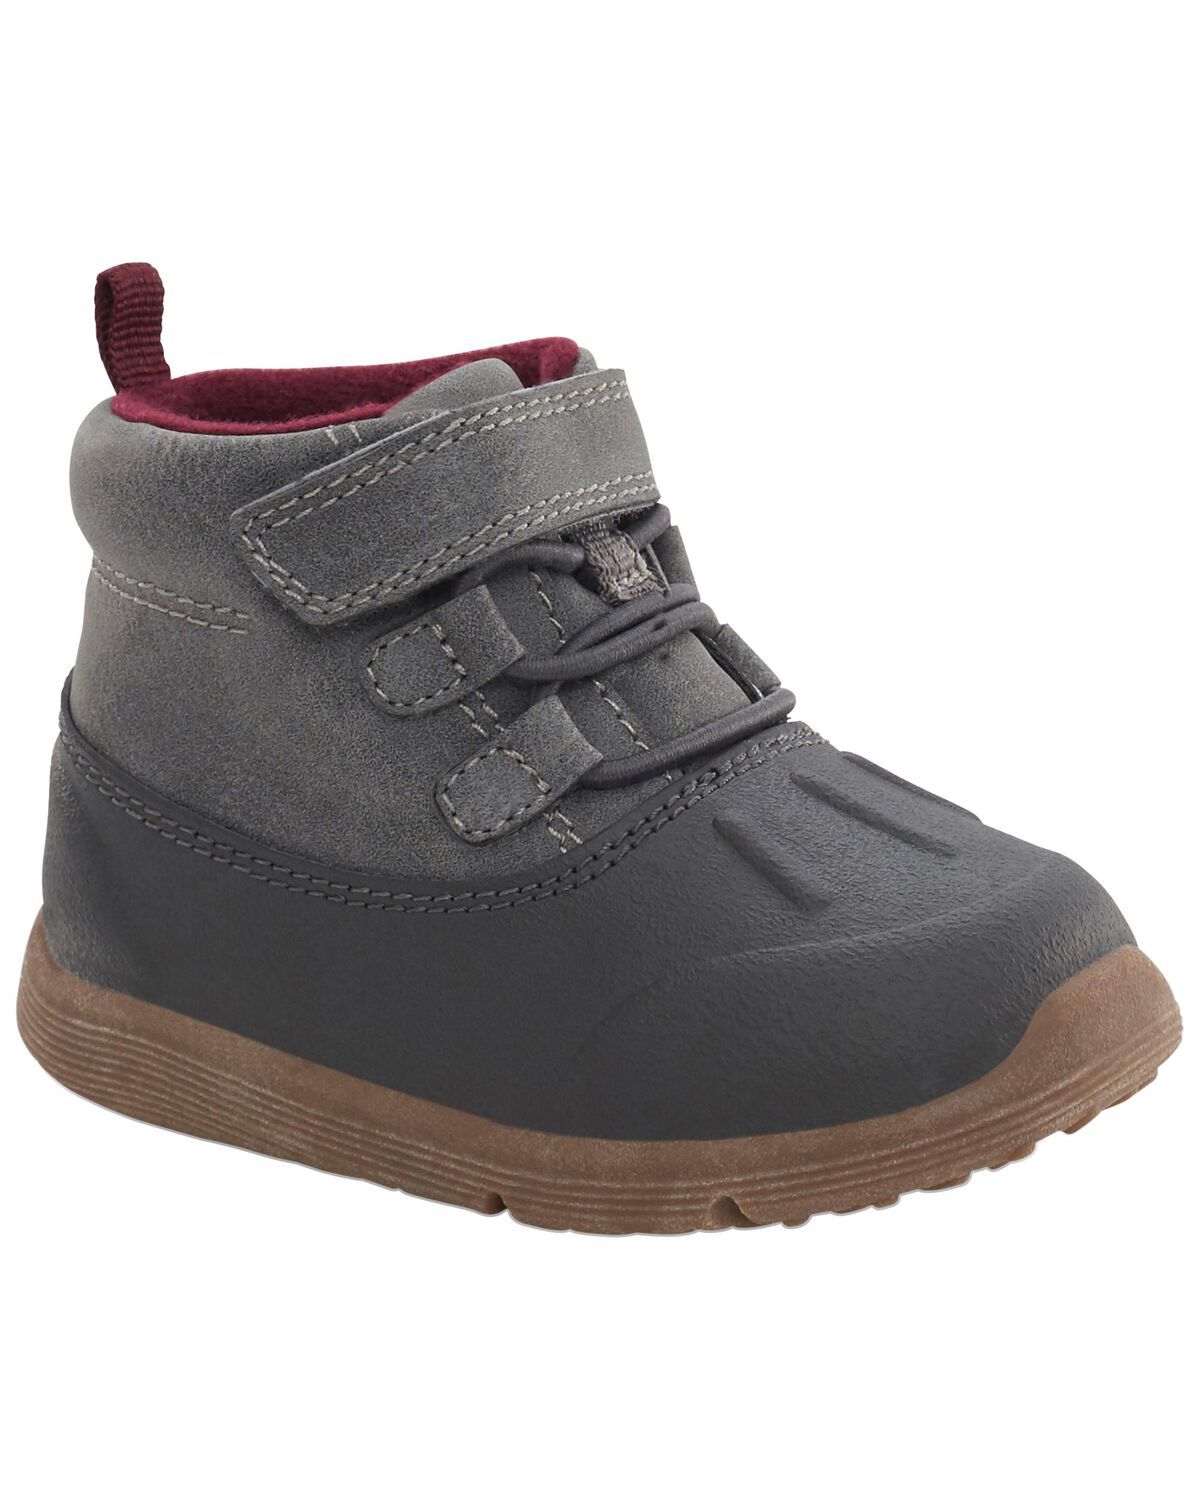 Grey Baby Every Step Duck Boots | carters.com | Carter's